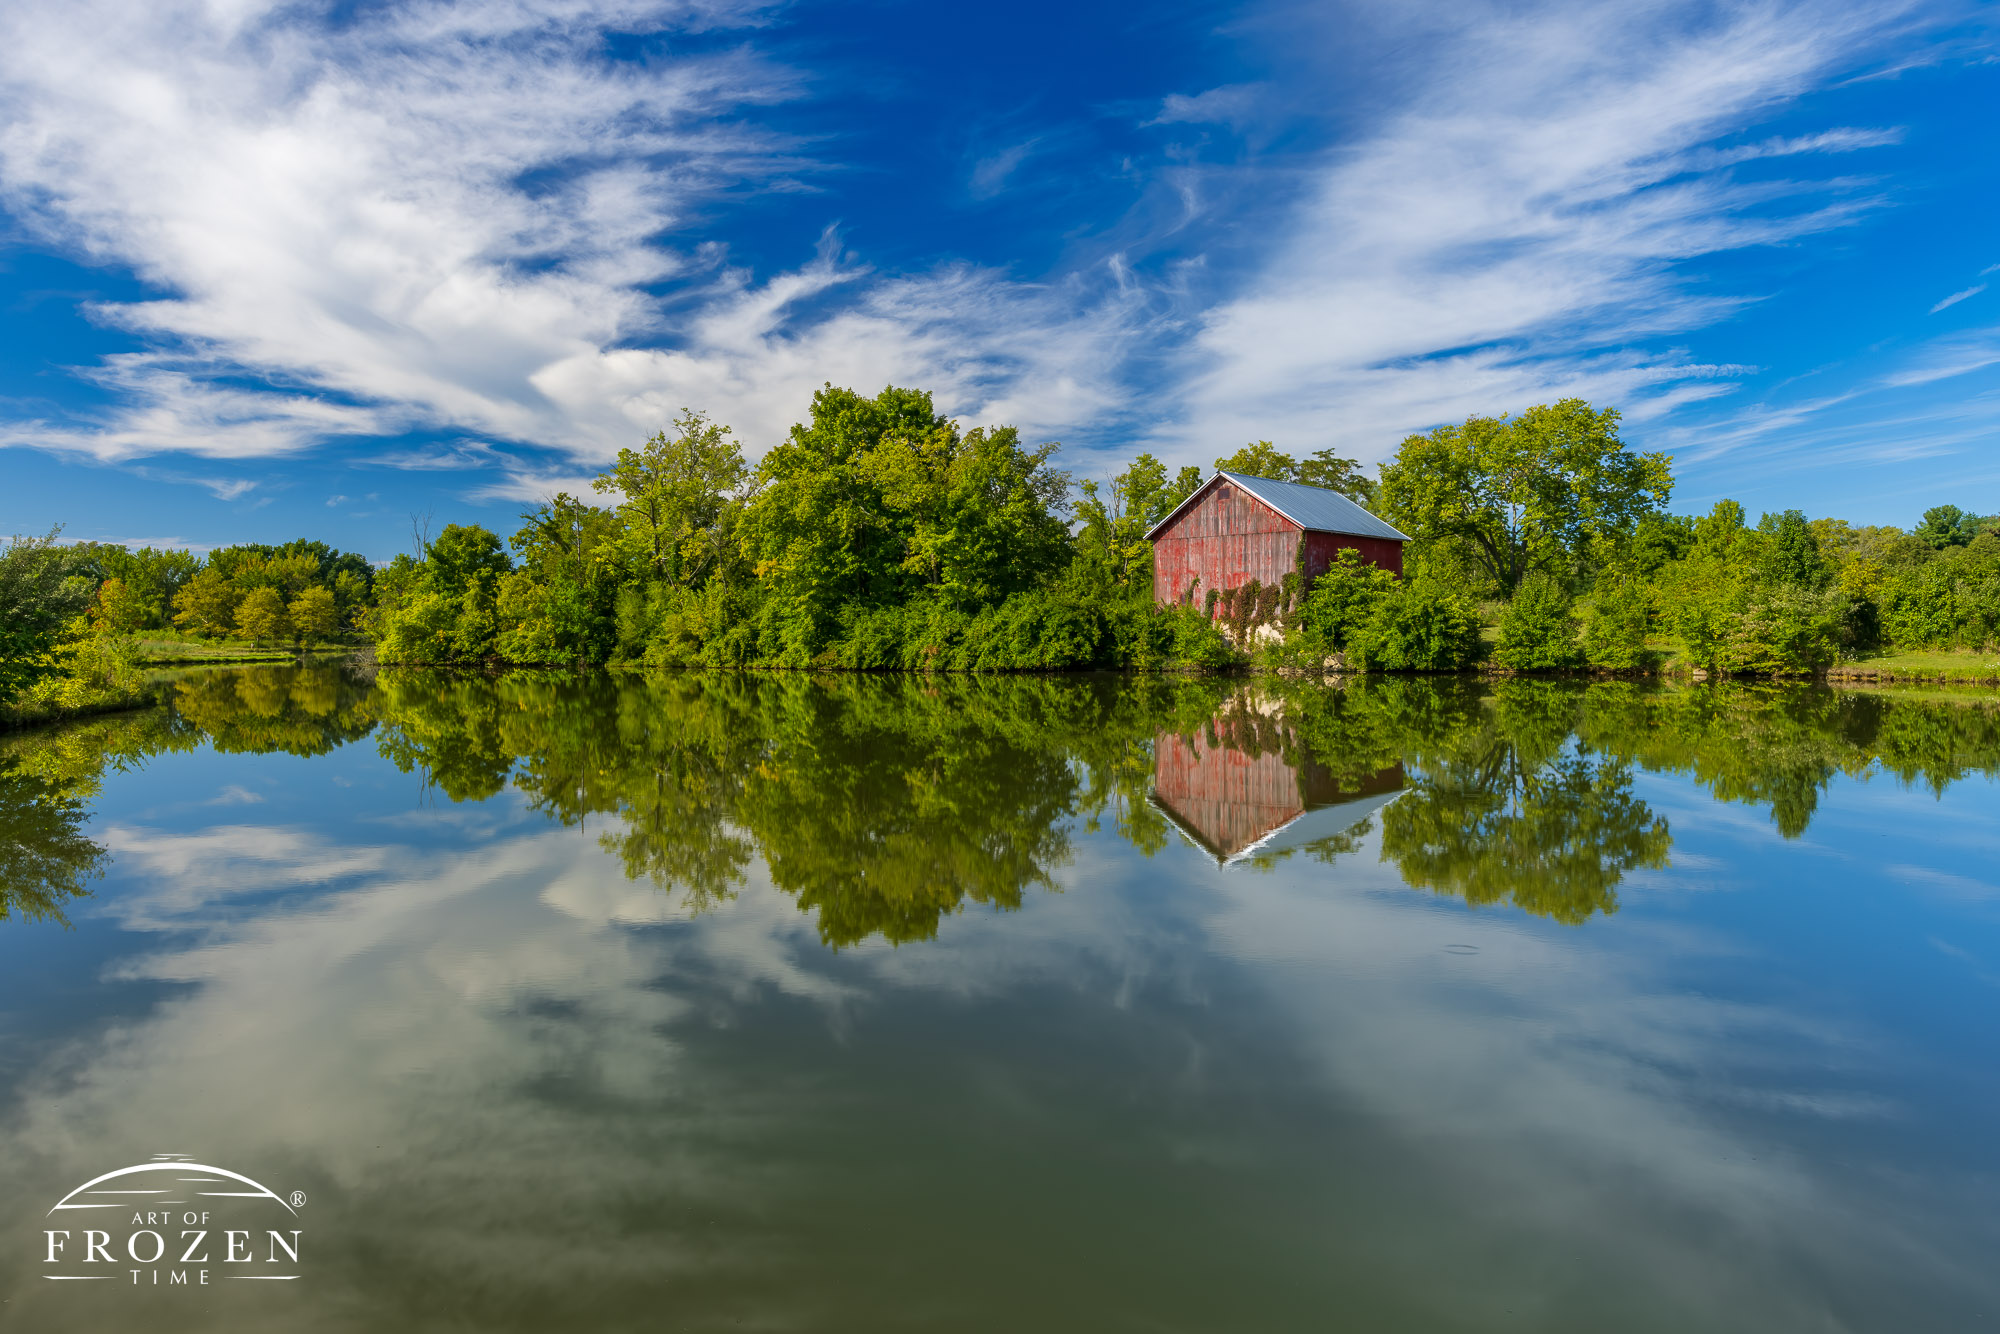 Fine art photography print of an old Ohio barn on a summer morning where the adjacent lake reflects the nostalgic structure as well as the blue sky above.